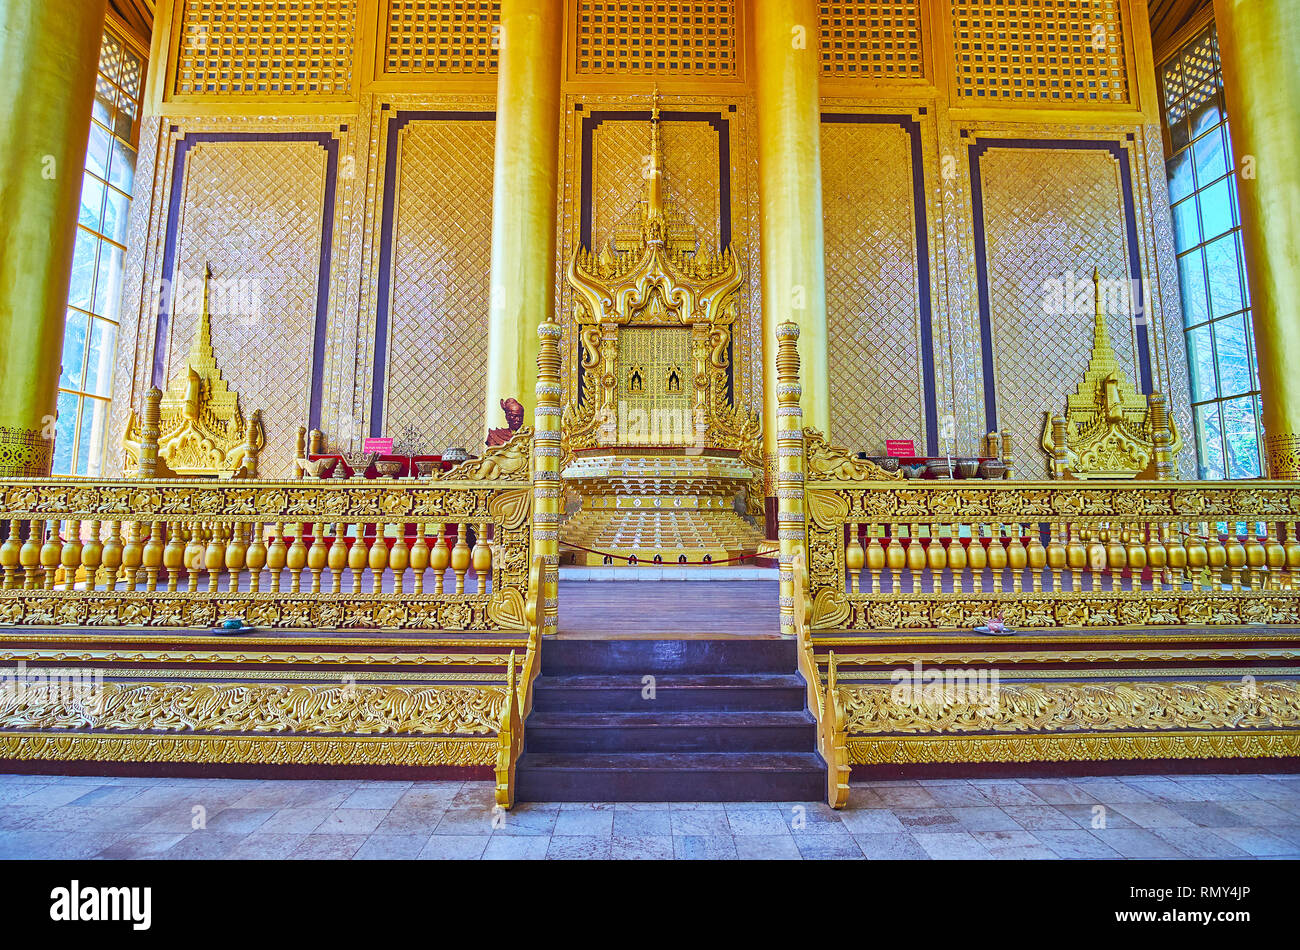 BAGO, MYANMAR - FEBRUARY 15, 2018: The stunning Thihathana or Lion Throne in Great Audience Hall of Kanbawzathadi Golden palace, on February 15 in Bag Stock Photo